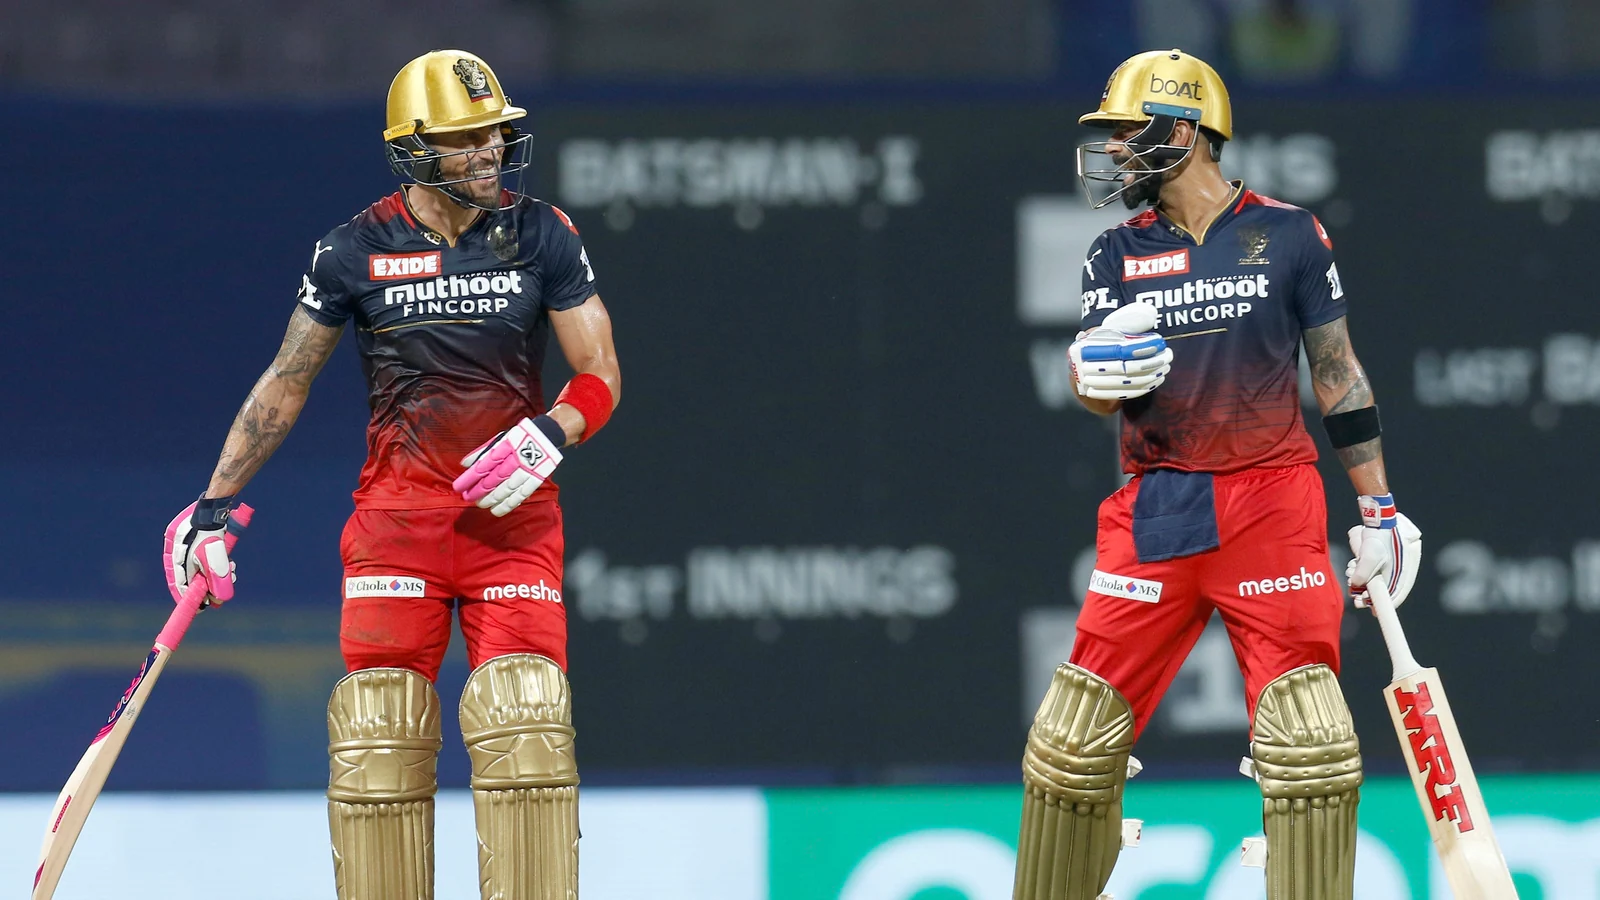 RCB Predicted XI vs CSK, IPL 2022: Batting remains a big concern, but will Faf du Plessis make a change in the line-up?